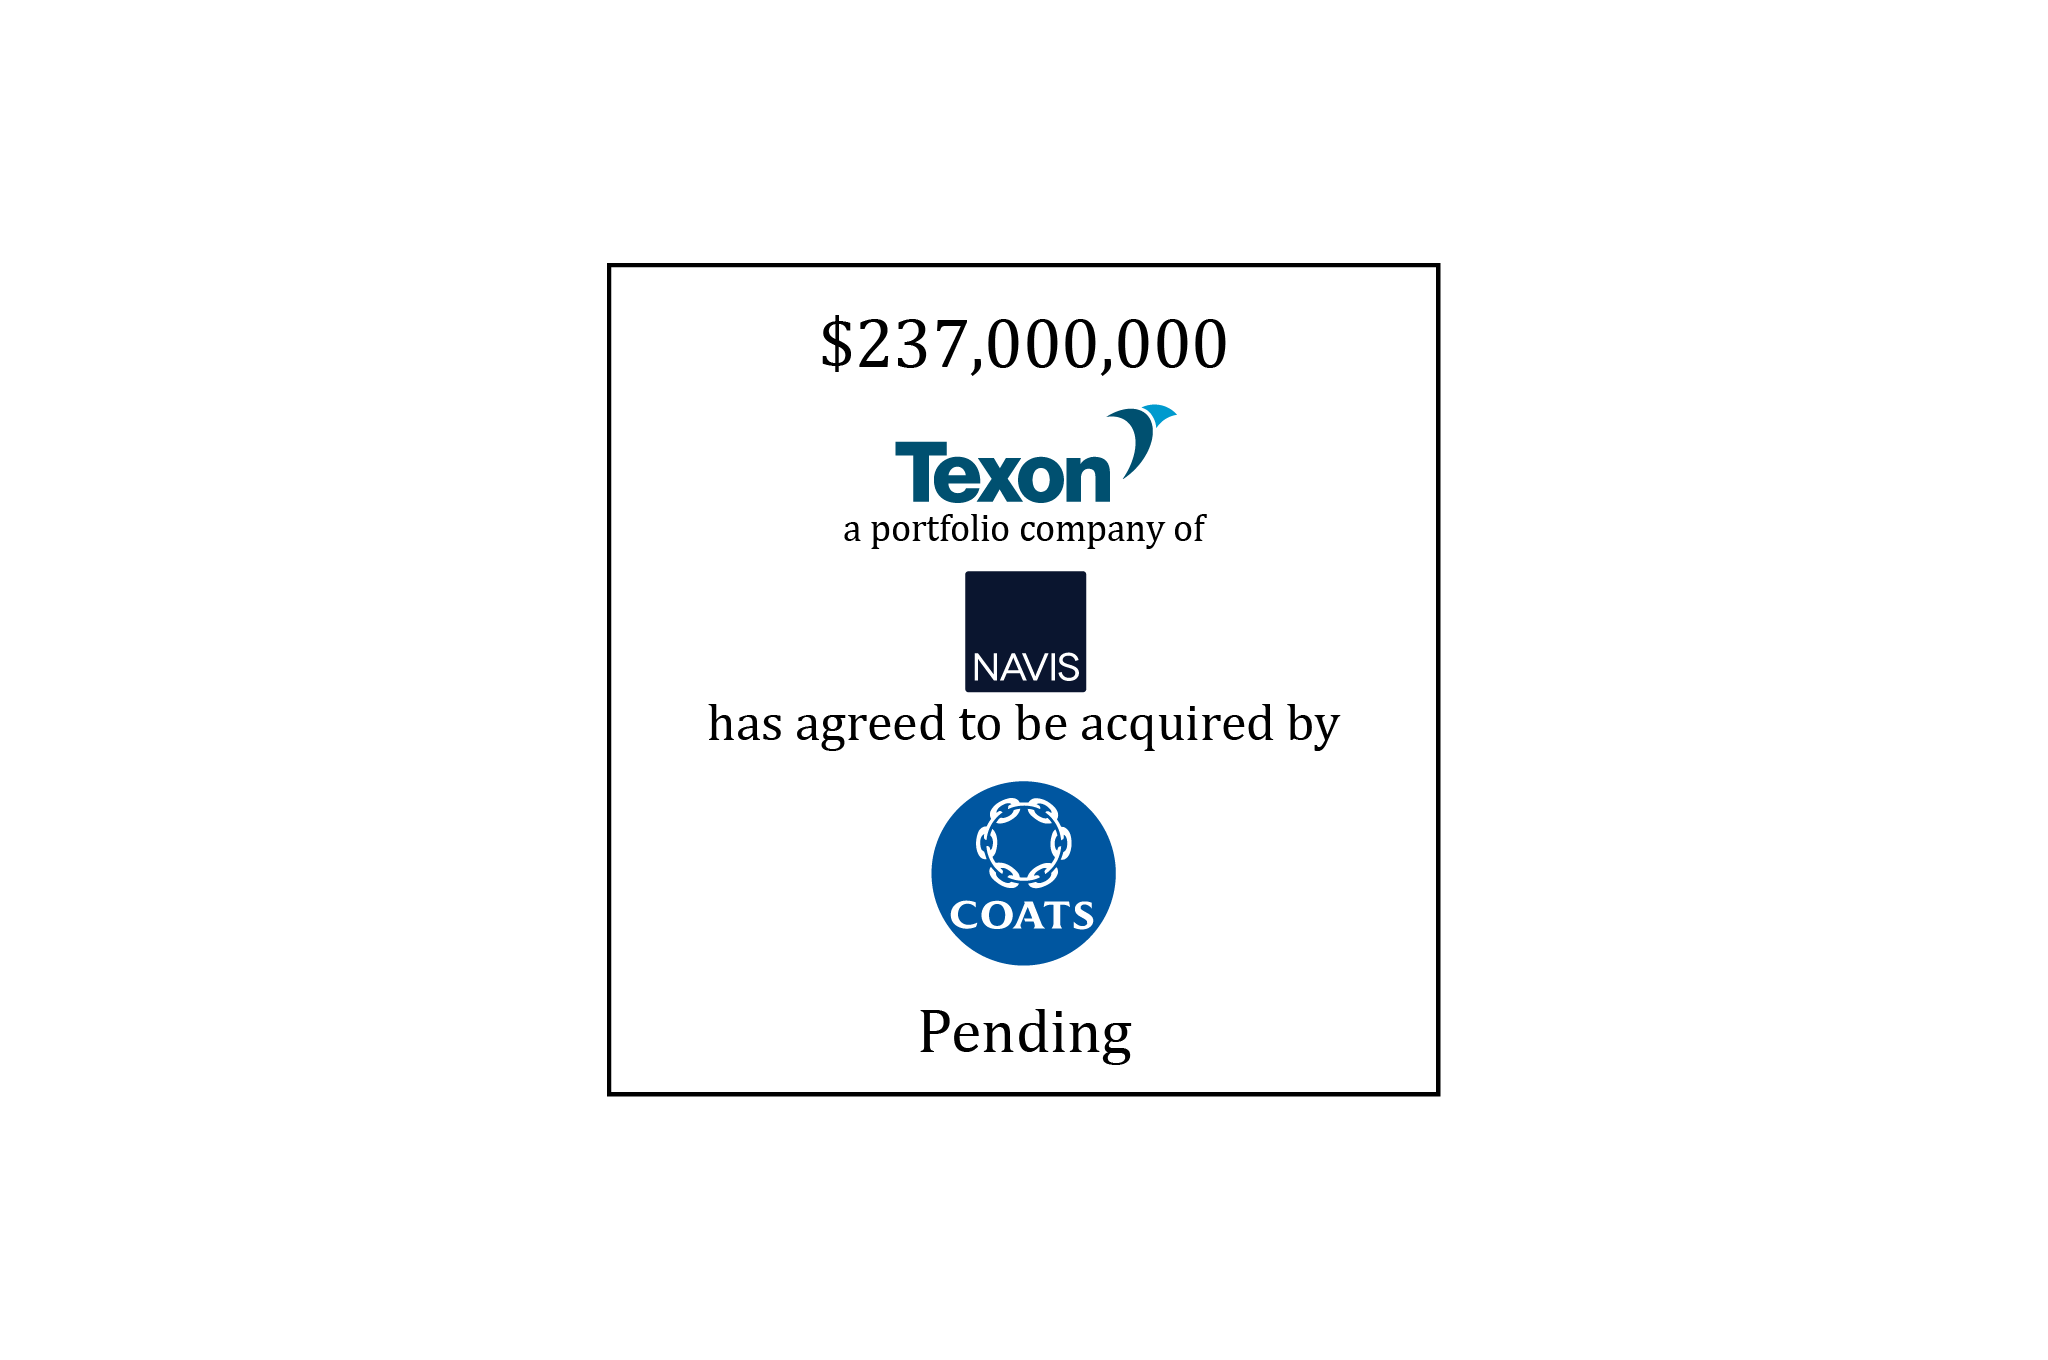 $237,000,000 | Texon (logo), a portfolio company of Navis (logo), has agreed to be acquired by Coats Group Plc (logo) | Pending